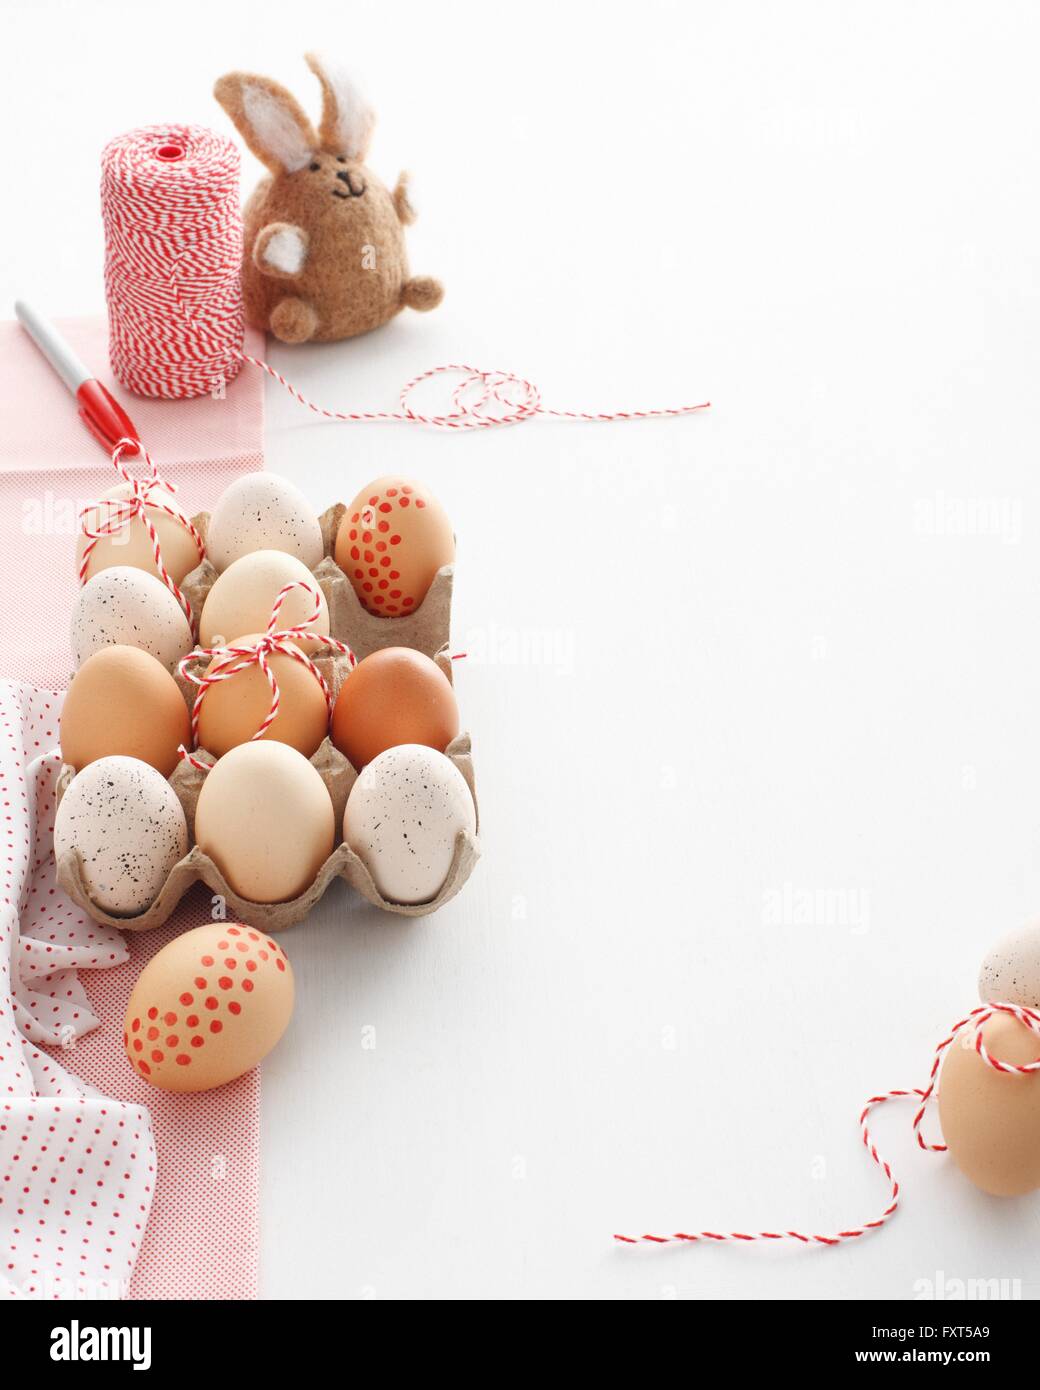 Carton of home decorated easter eggs and easter bunny on white table Stock Photo